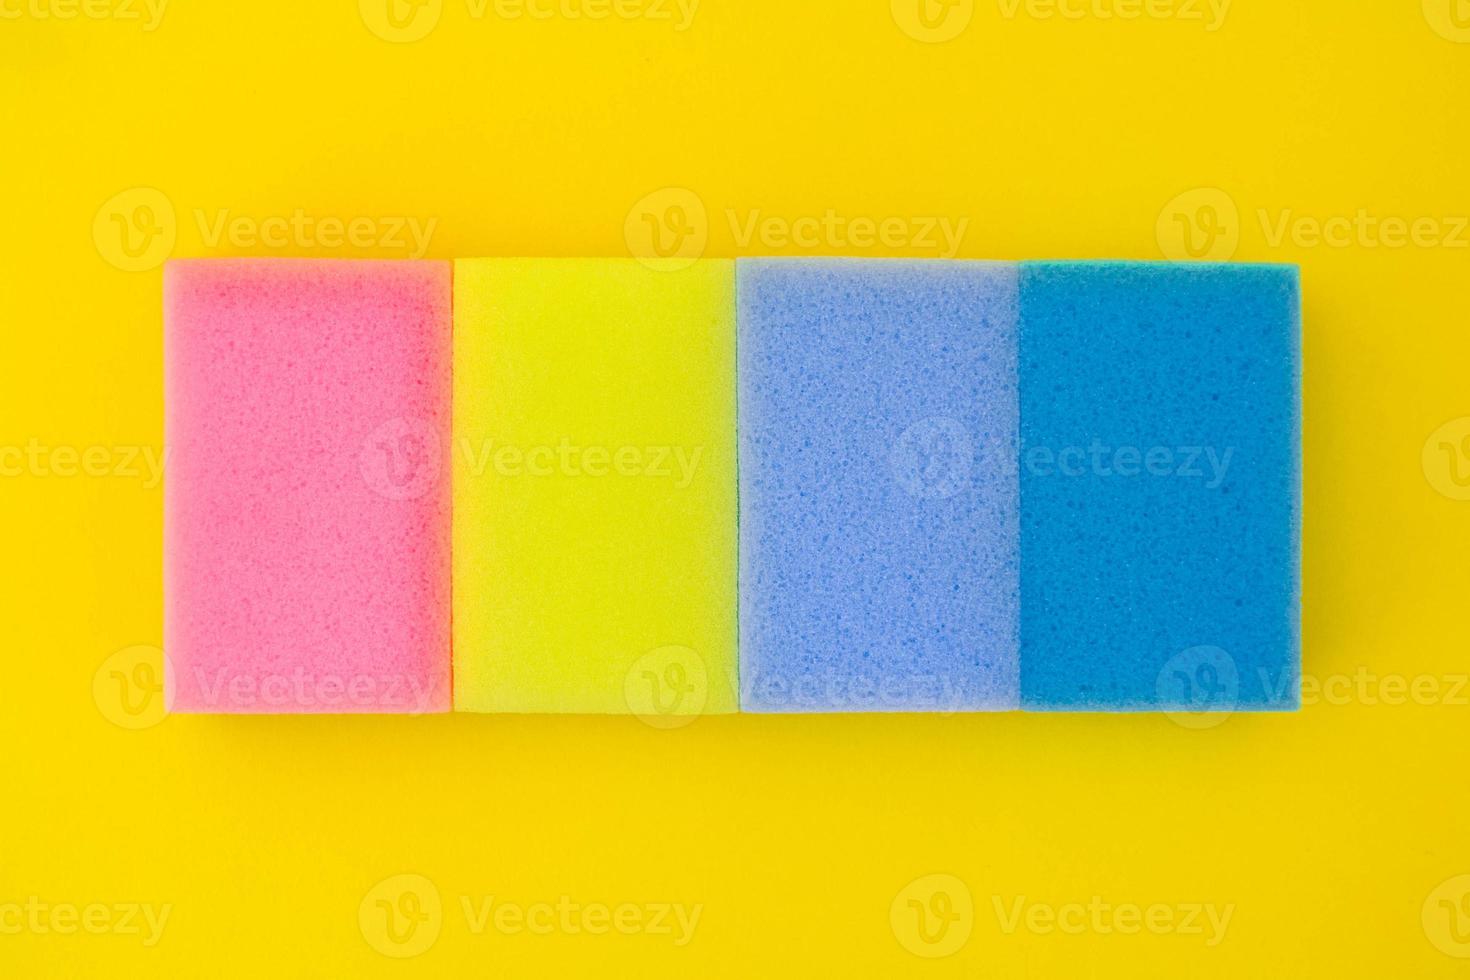 Multi-colored foam rubber sponge for cleaning and washing dishes on a yellow background photo